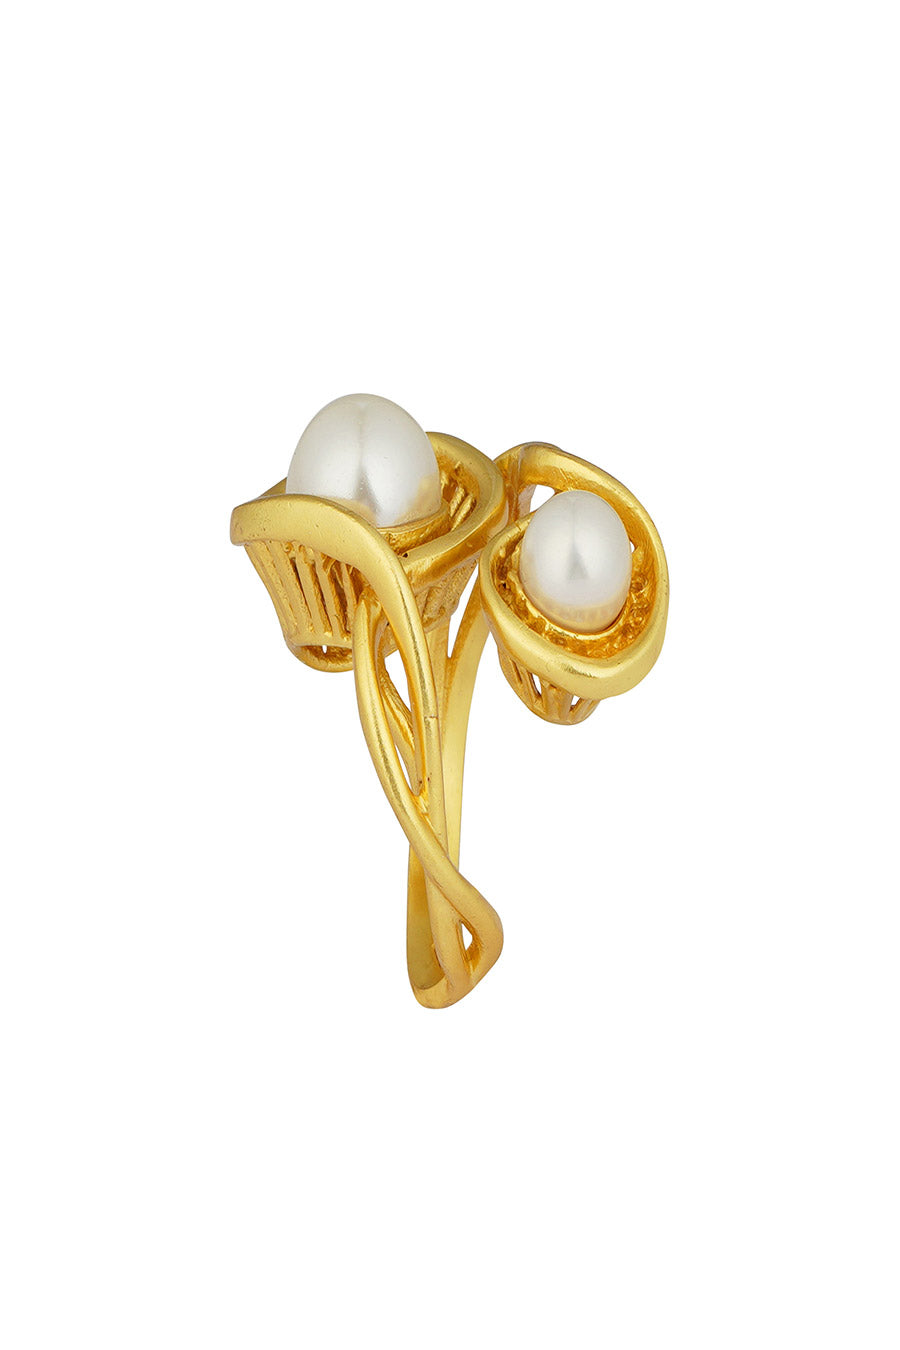 Twist in The Tale - Gold Plated Pearl Ring